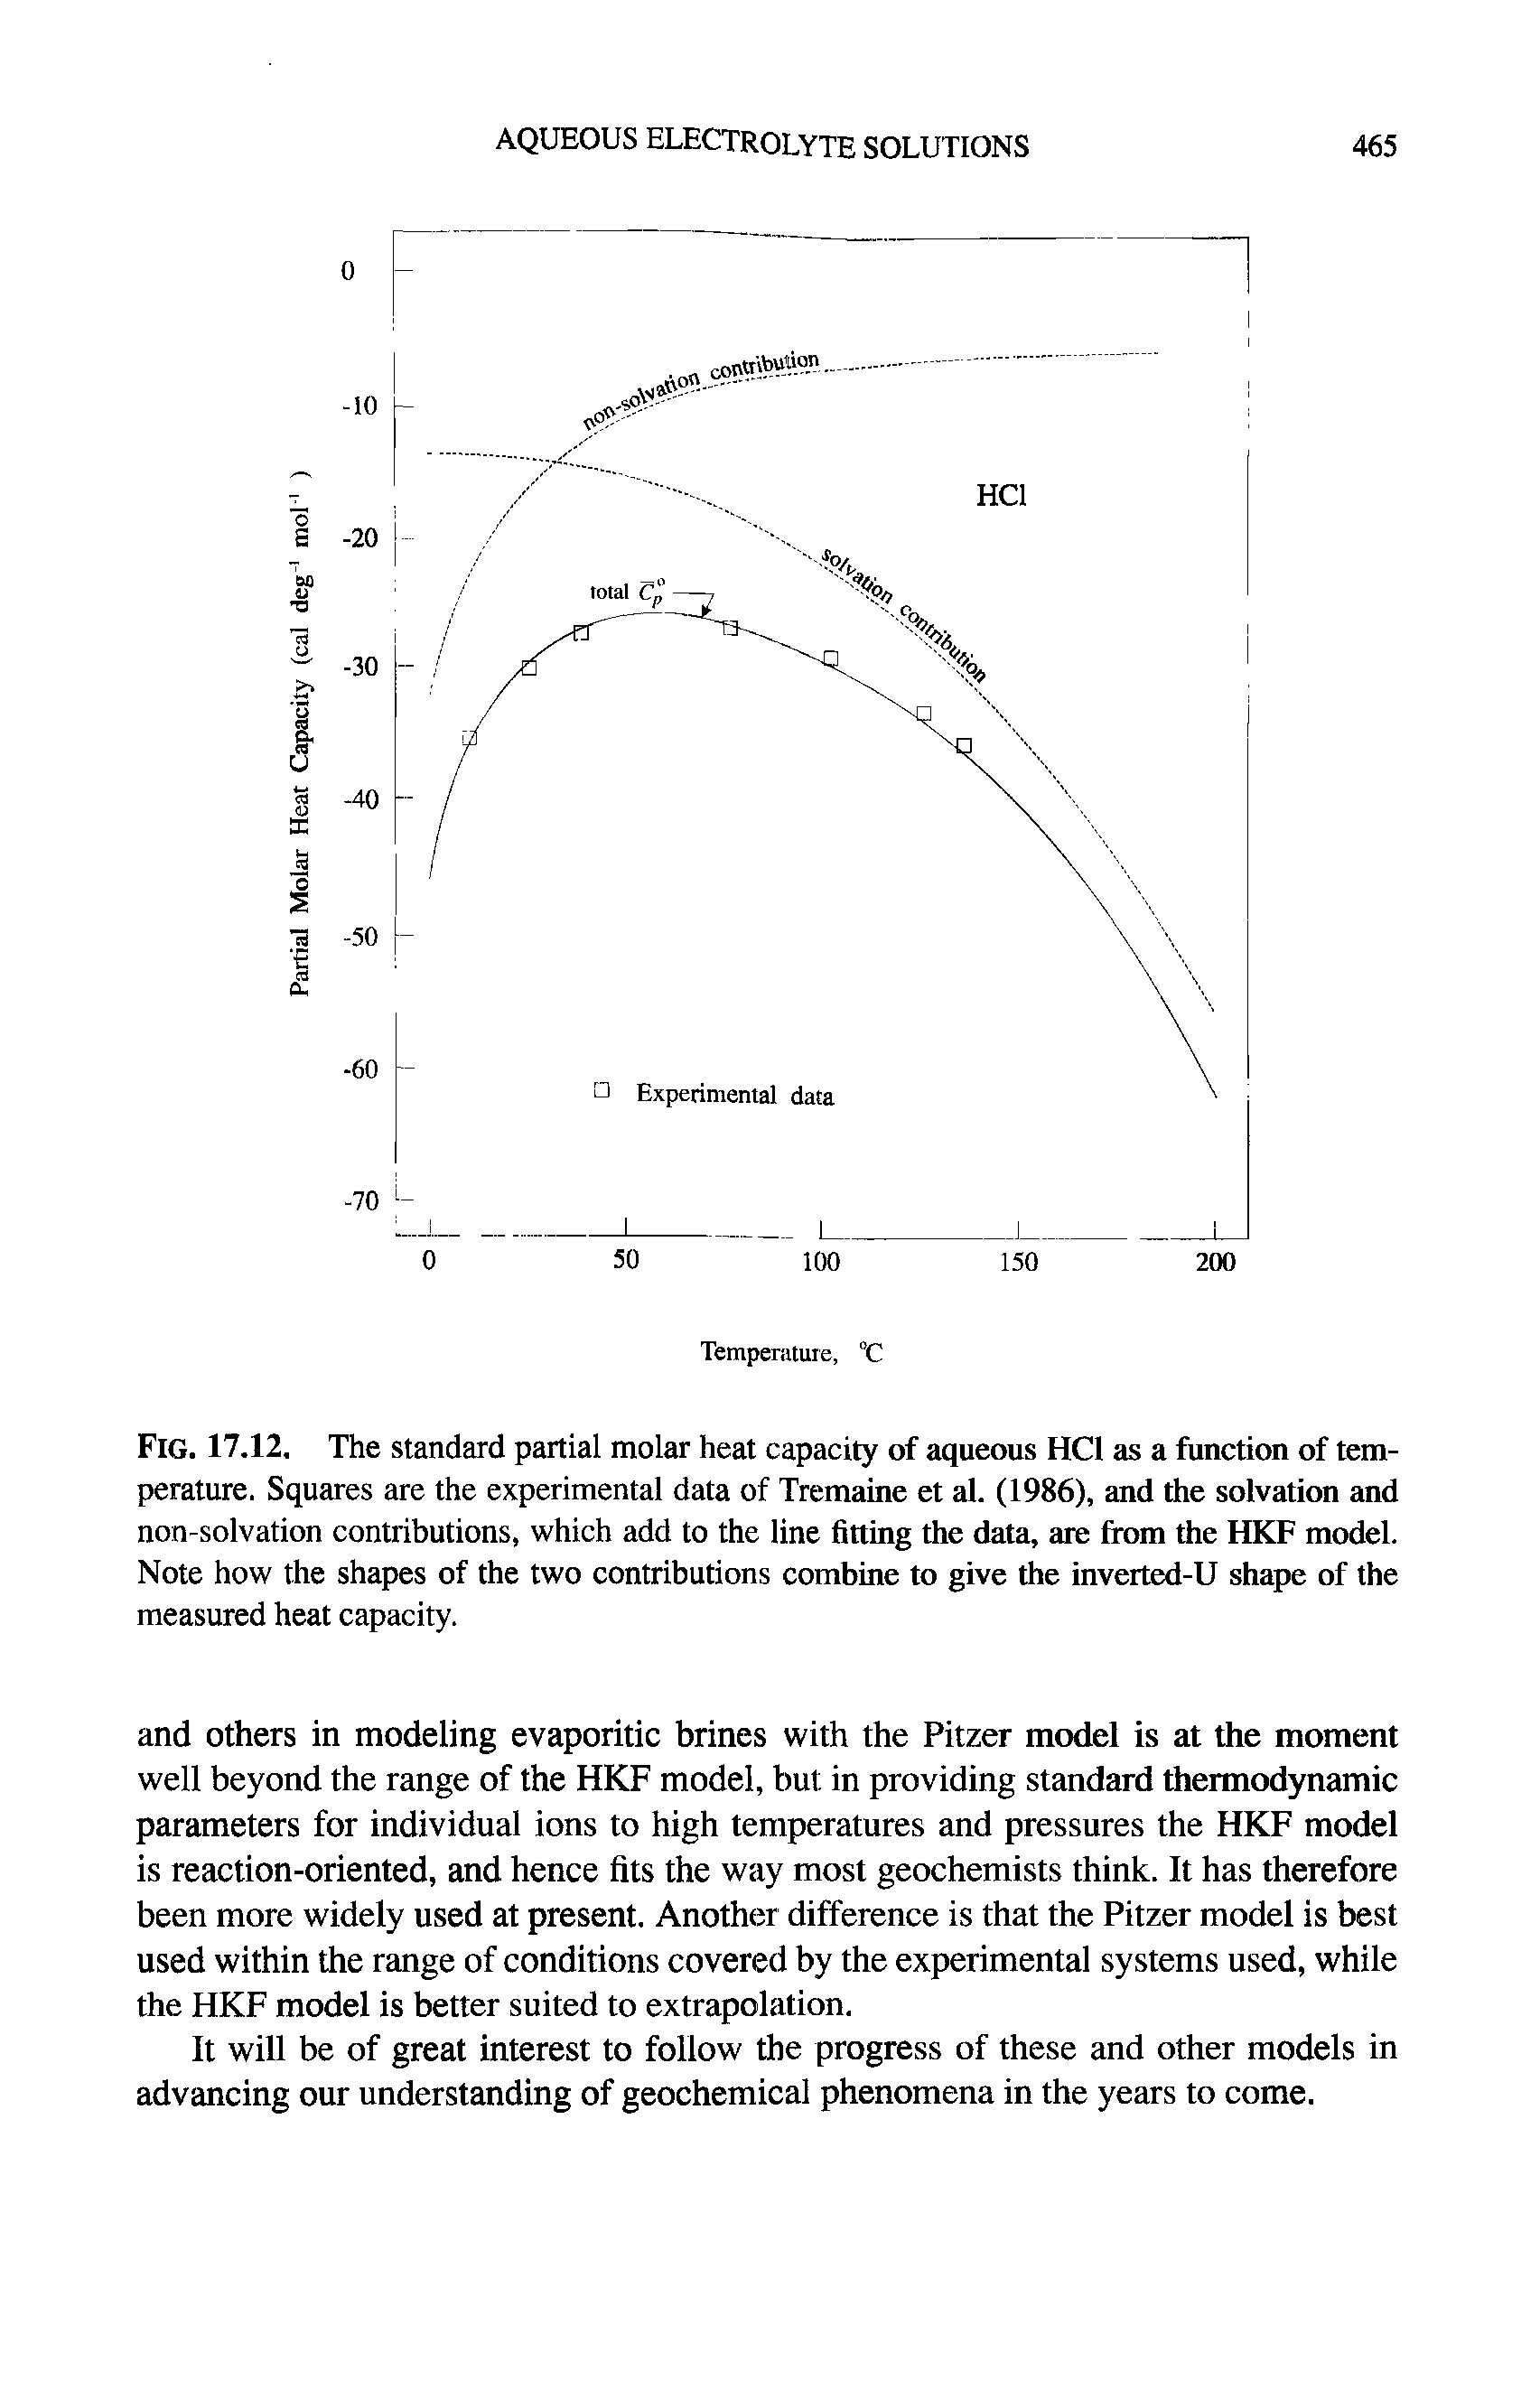 Fig. 17.12. The standard partial molar heat capacity of aqueous HCl as a function of temperature. Squares are the experimental data of Tremaine et al. (1986), and the solvation and non-solvation contributions, which add to the line fitting the data, are from the HKF model. Note how the shapes of the two contributions combine to give the inverted-U shape of the measured heat capacity.